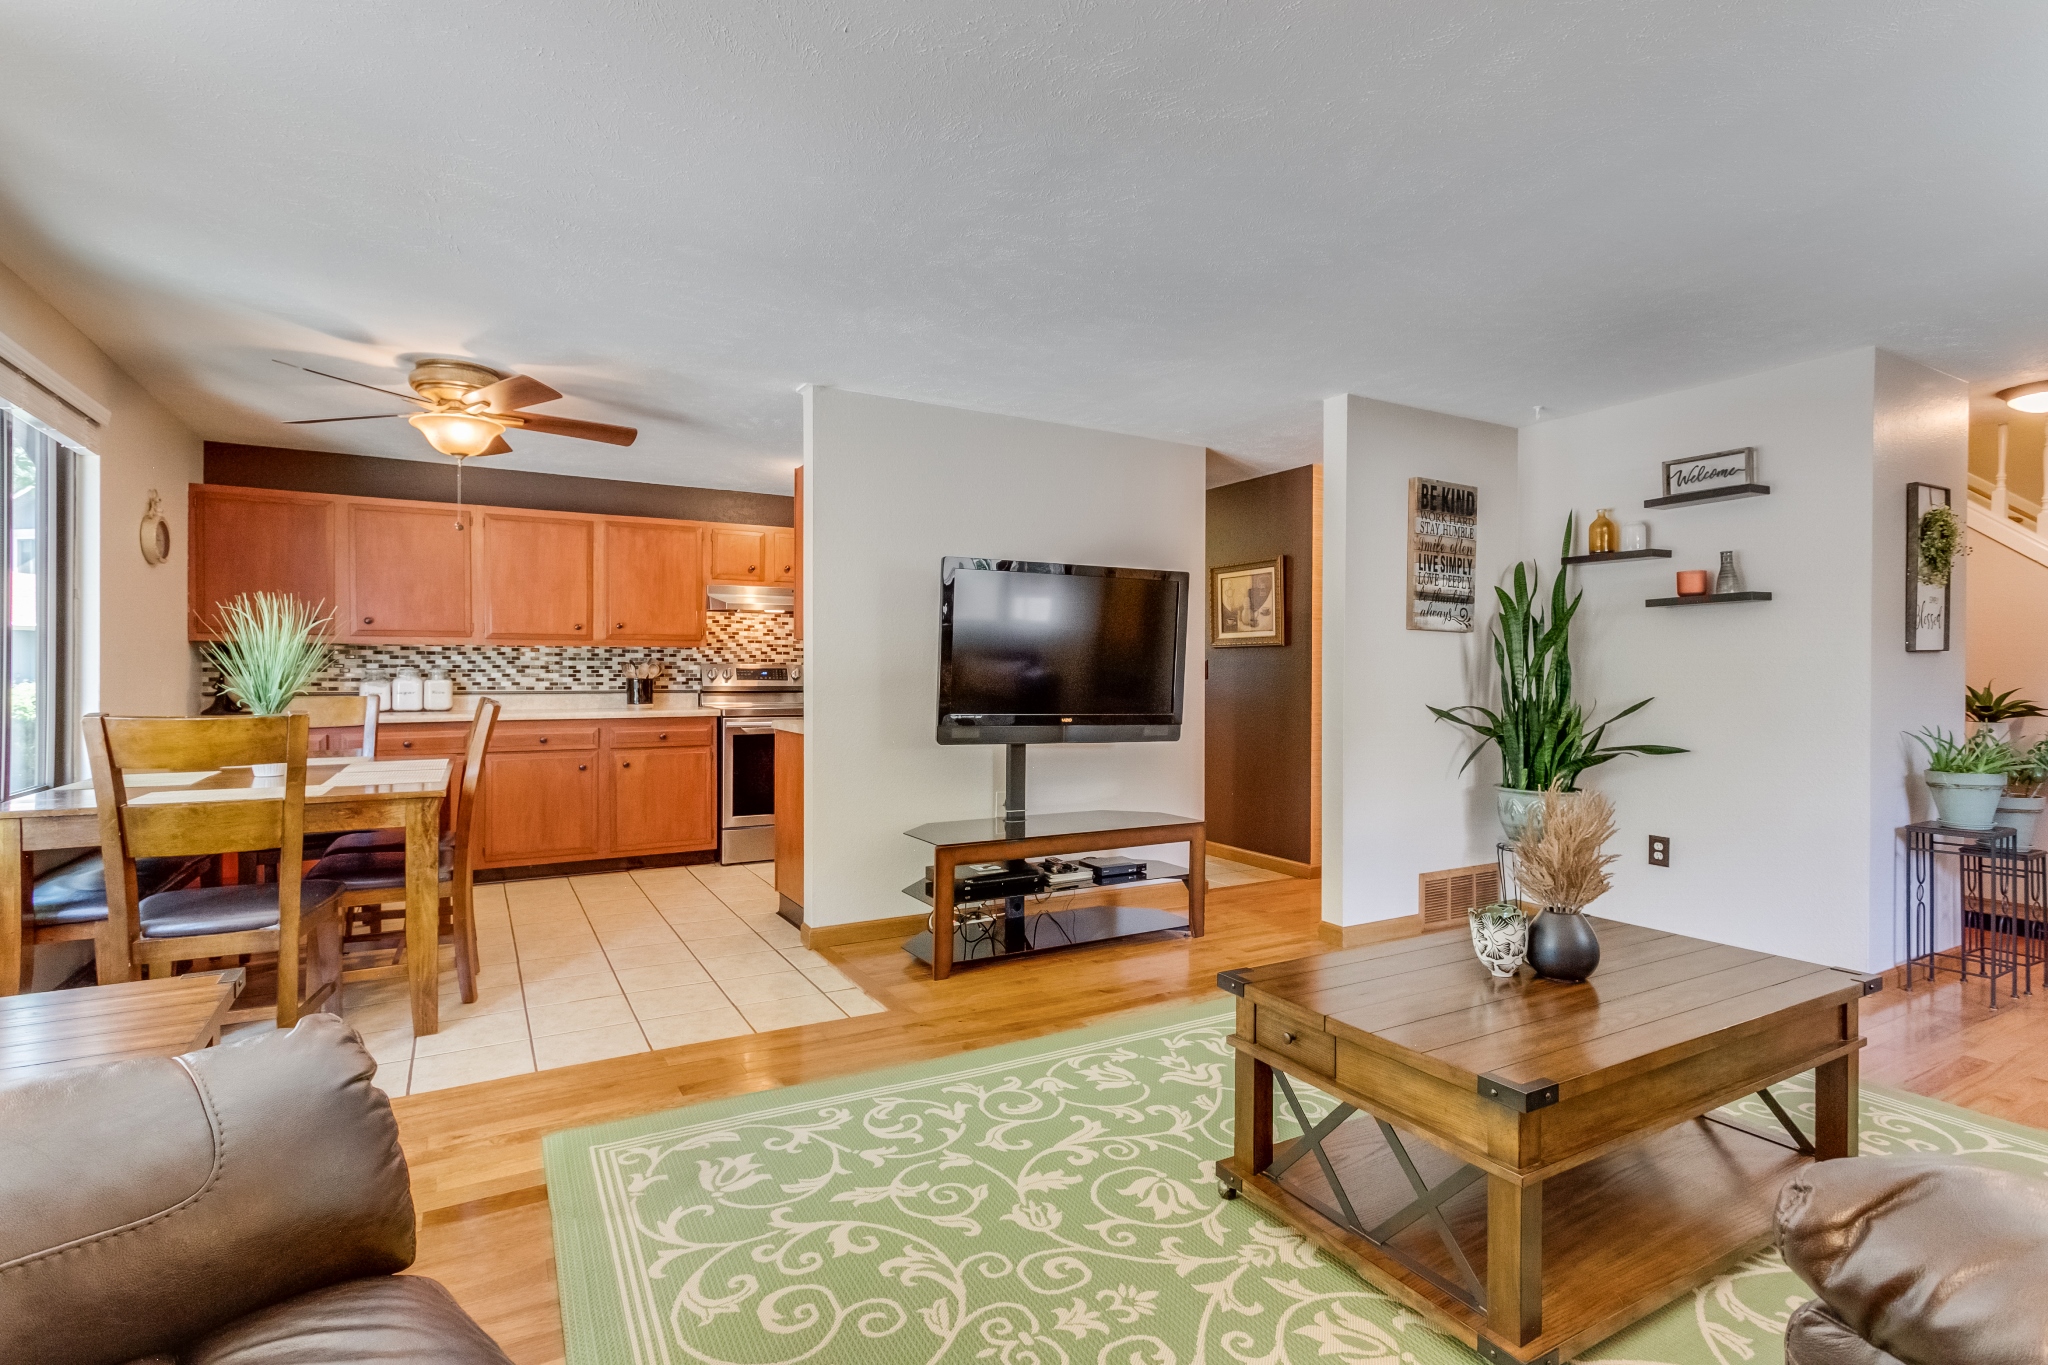 REAL ESTATE LISTING: 461 Verdant Circle Living Room and Kitchen Eating Area